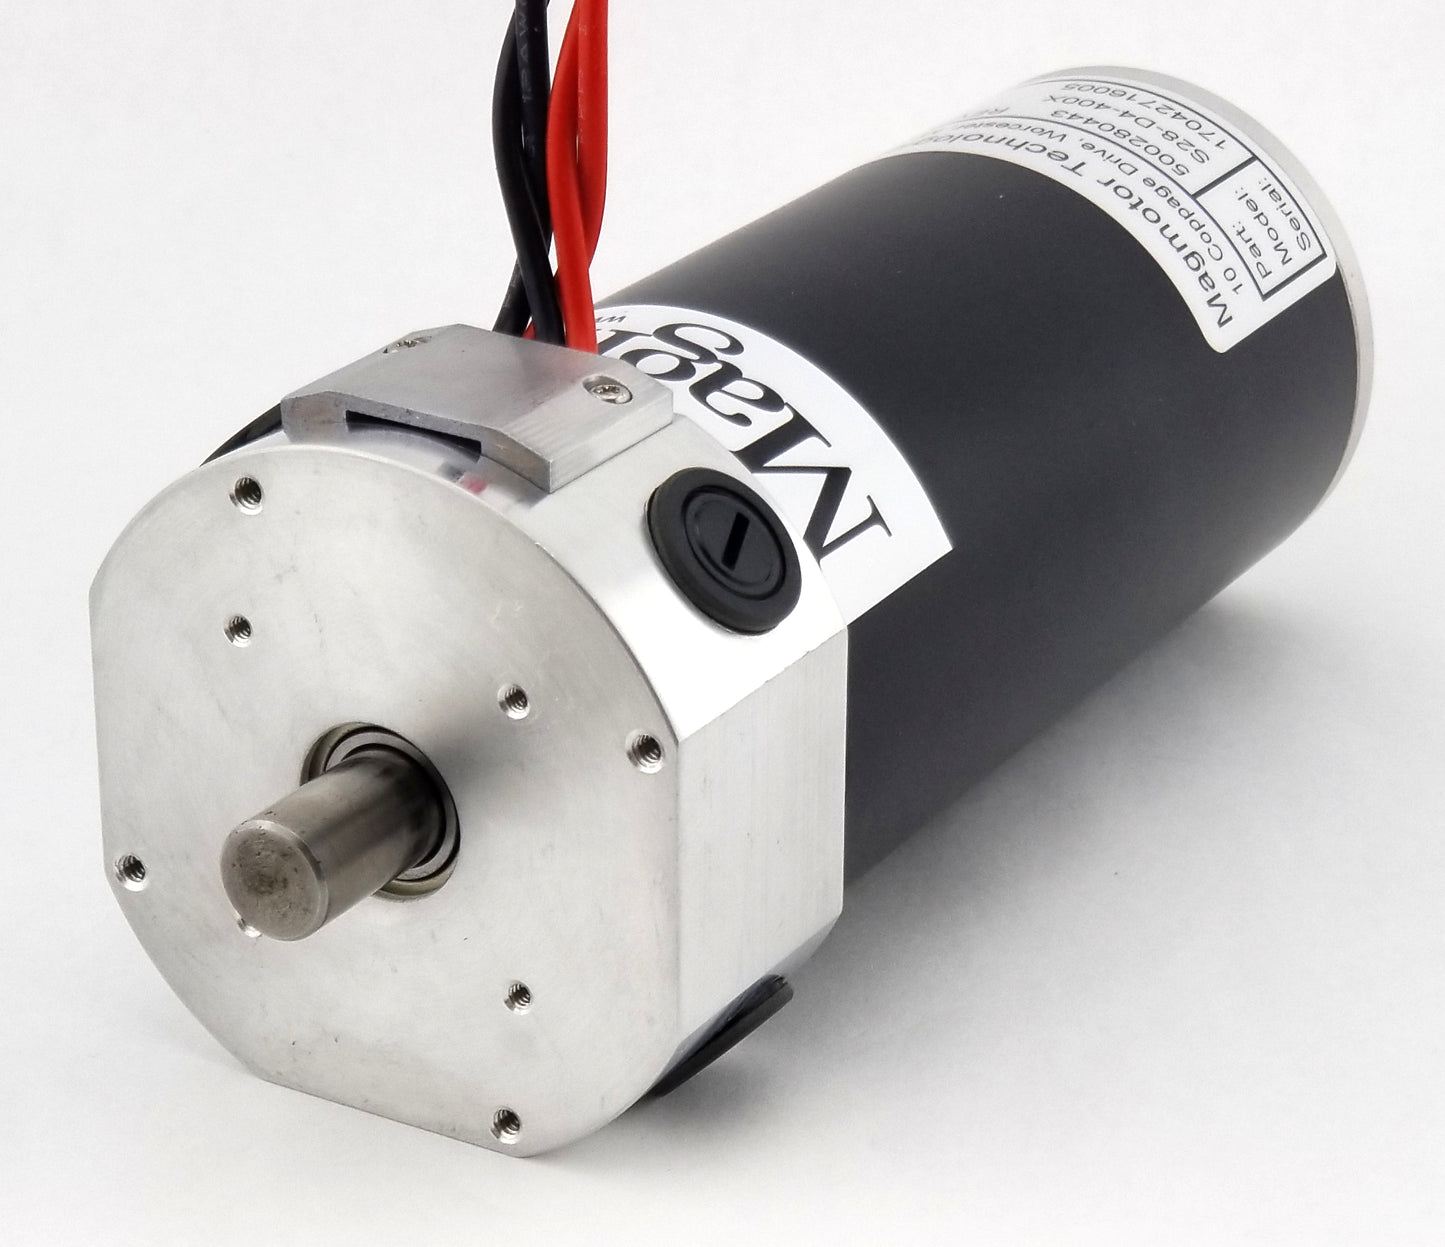 Magmotor S28-D4-400X 12 to 30 Volt 4 Pole Brushed Combat Motor 500280443 Slim Design Rear View